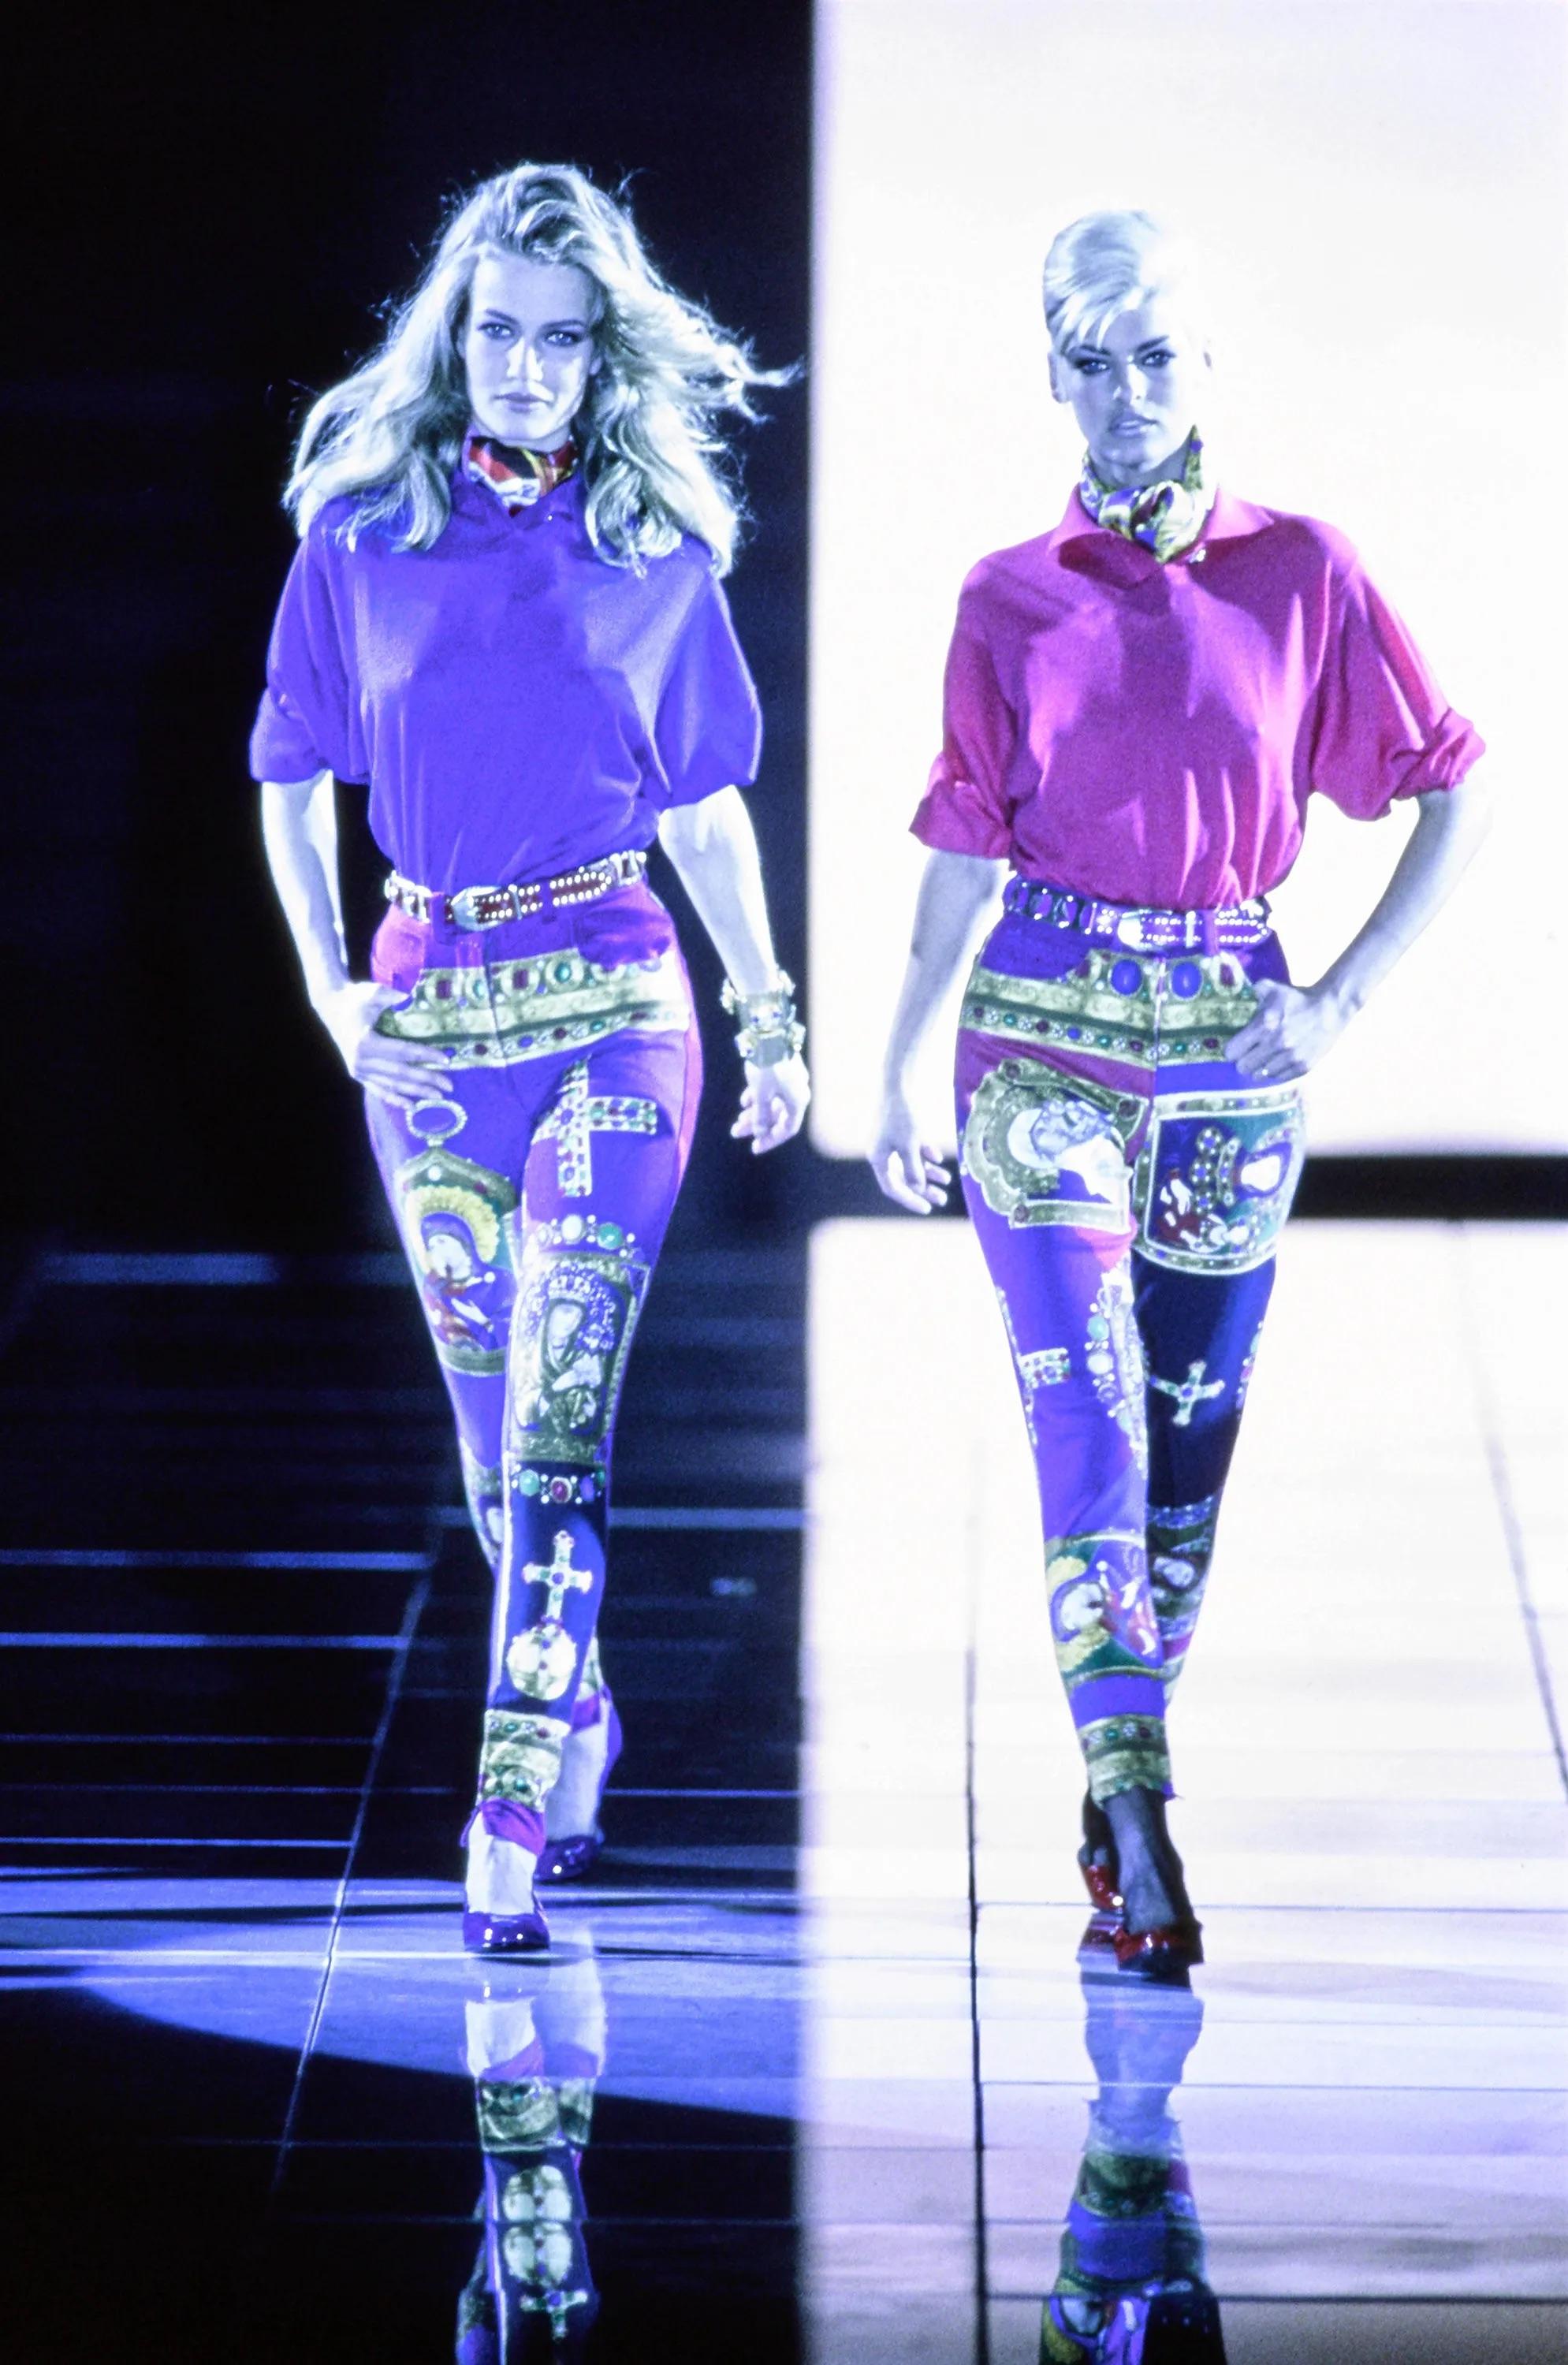 Presenting a pair of multicolored Roman Catholic-inspired denim pants by Gianni Versace, designed by Gianni Versace for the Fall/Winter 1991 collection. These denim pants made their debut on the season's runway, showcased by Linda Evangelista, and